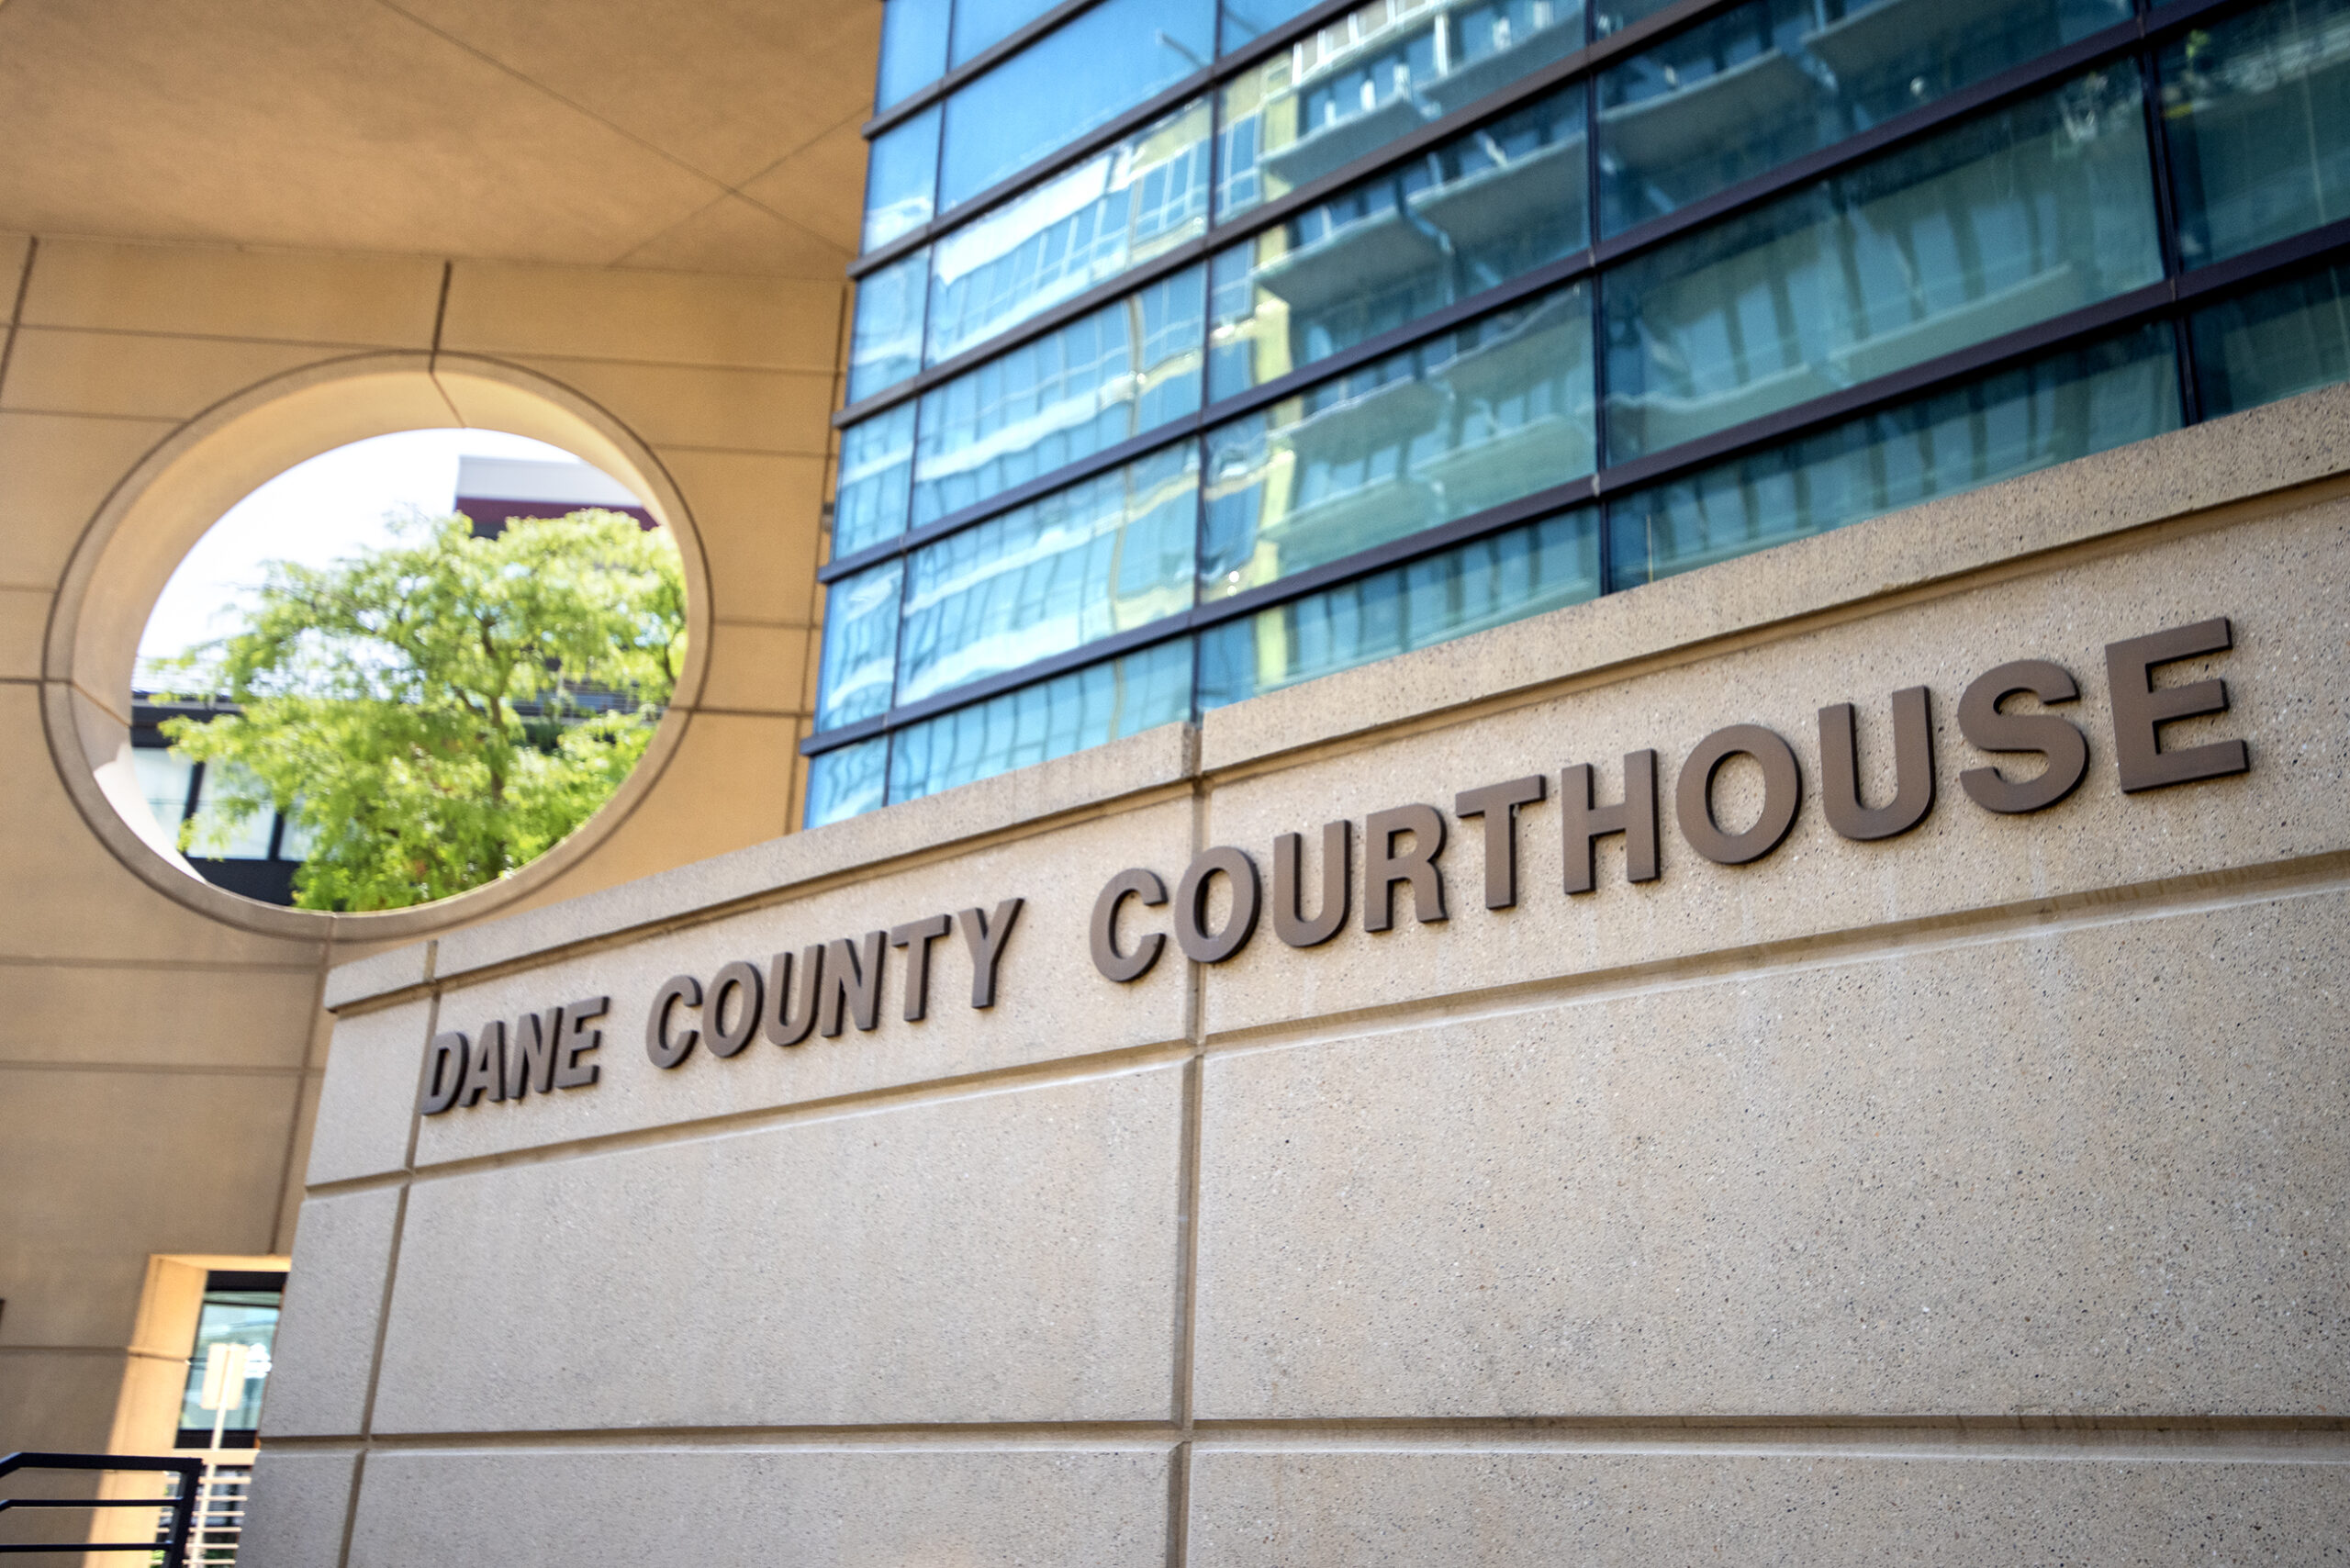 A sign says "Dane County Courthouse" on the outside of a building.